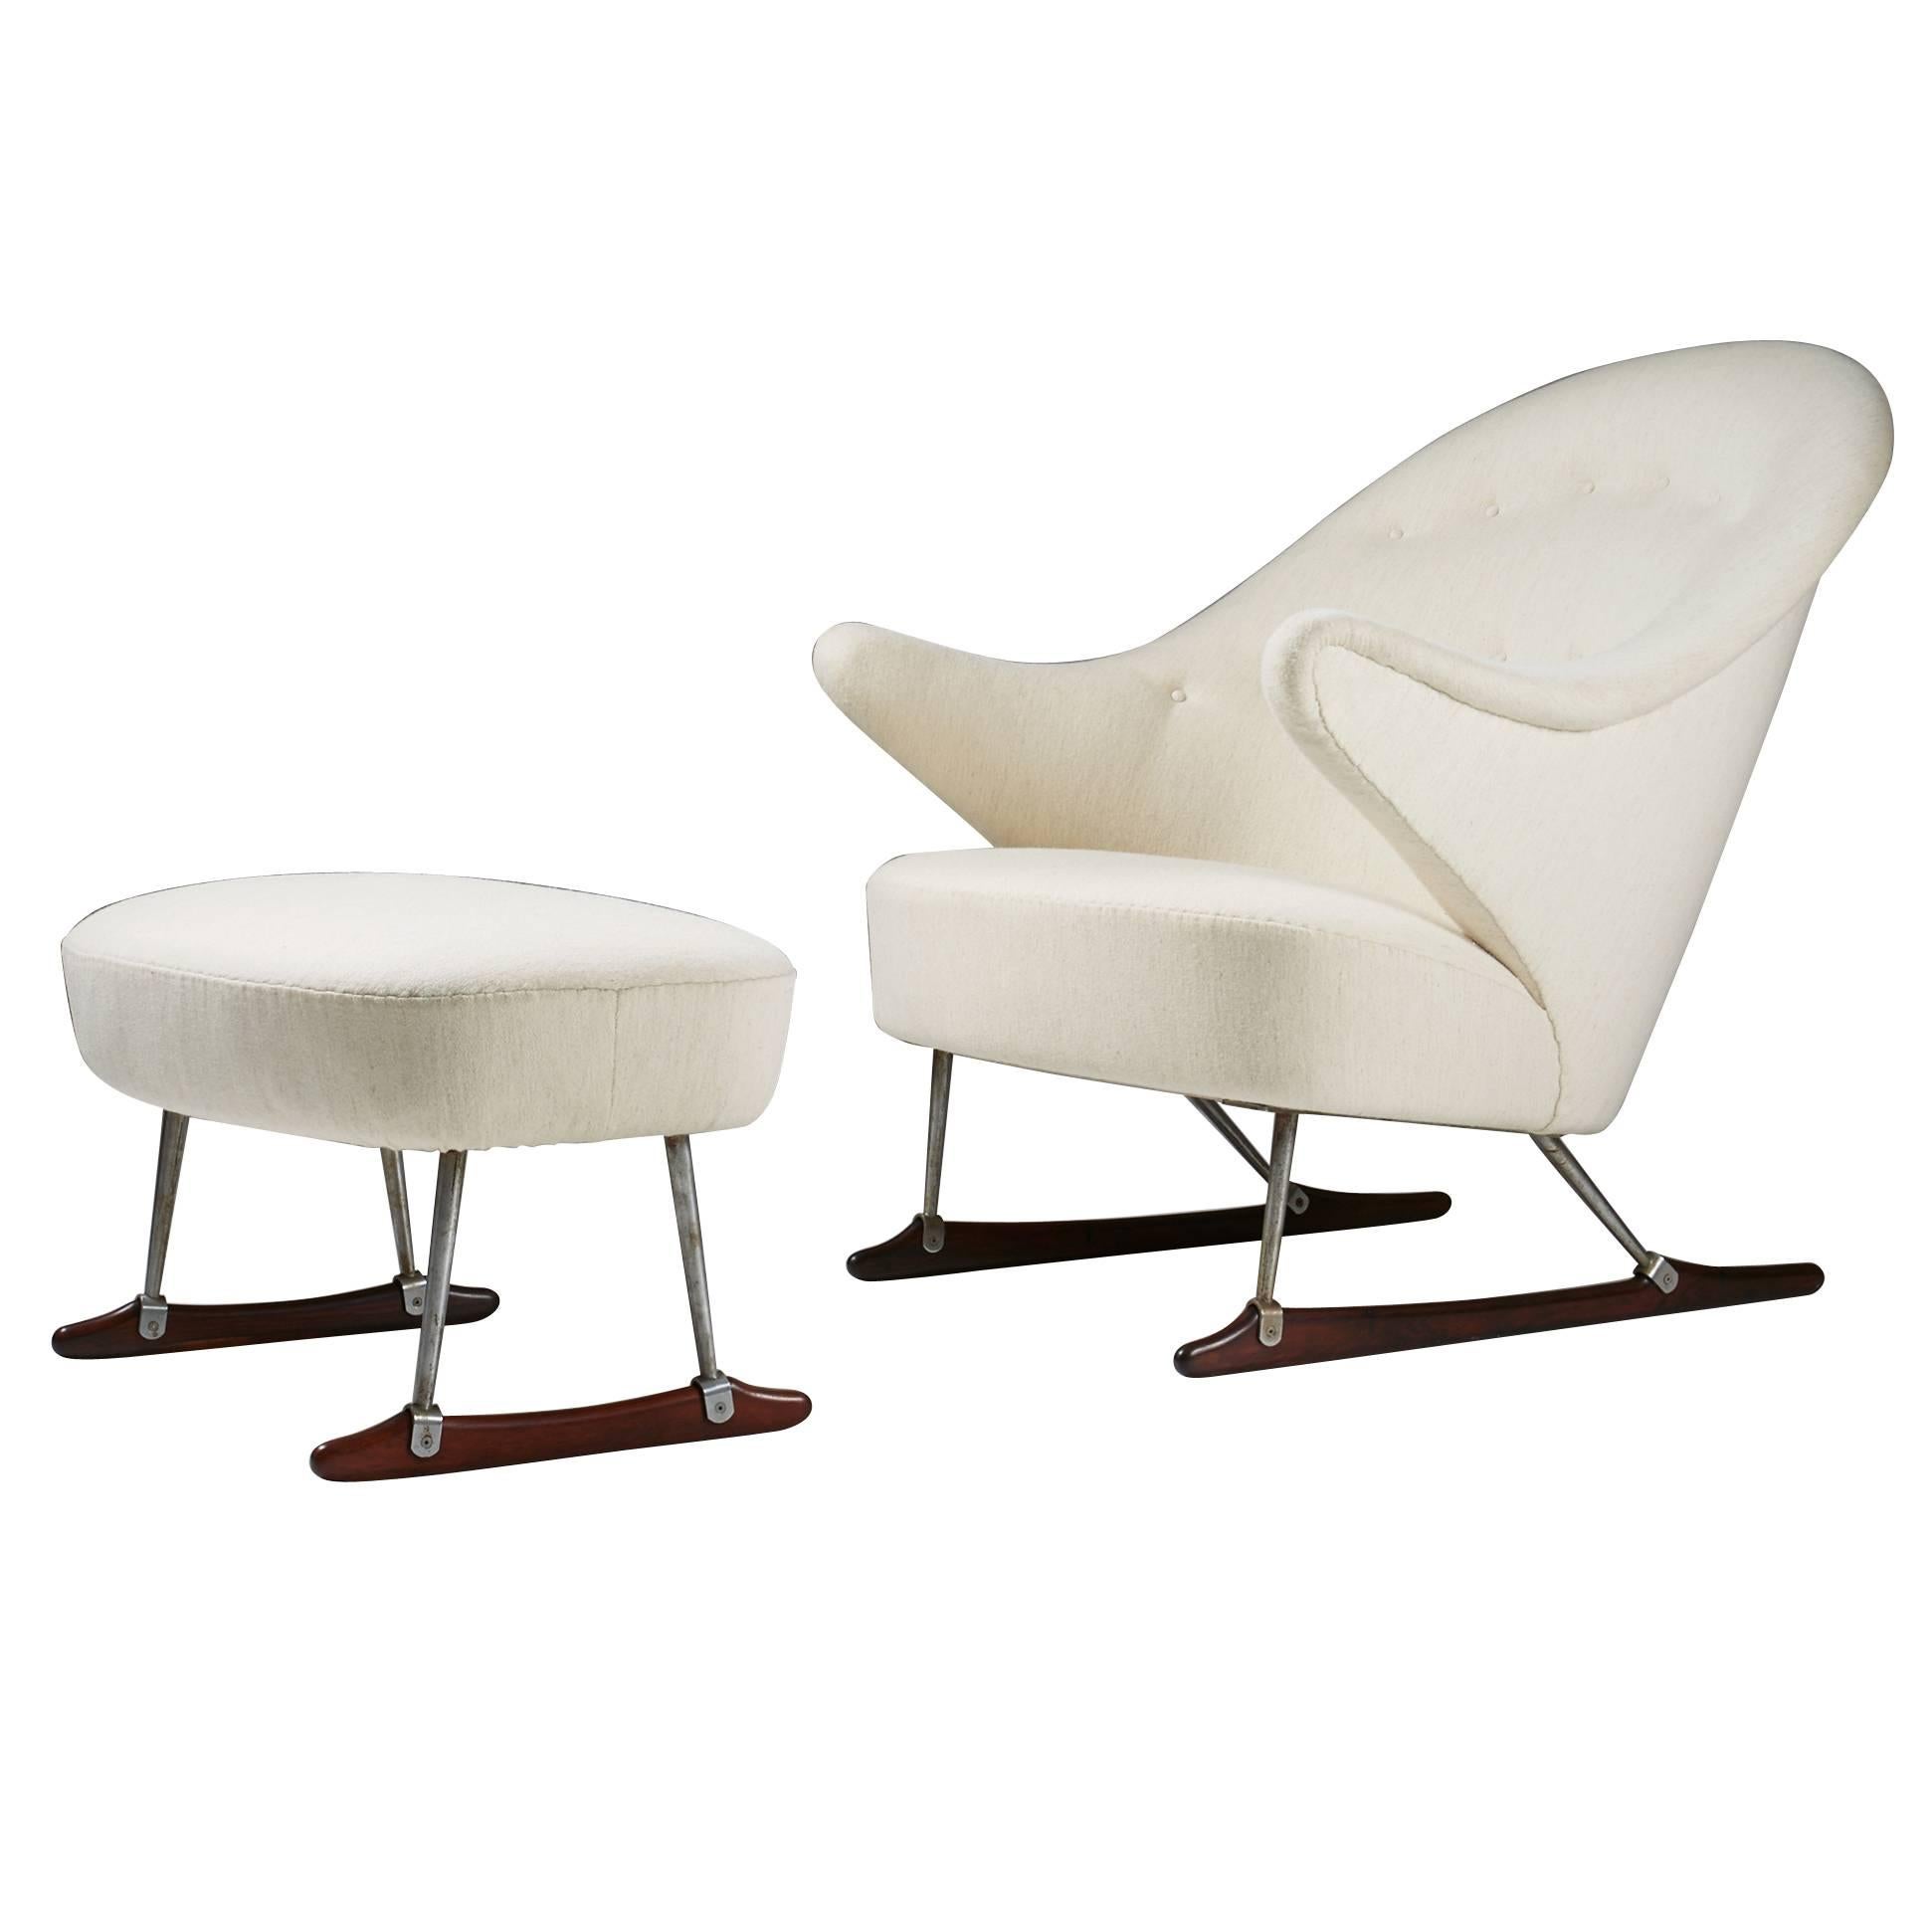 Sleigh Chair and footstool by Børge Mogensen for Tage M Christensen & Co, 1953 For Sale